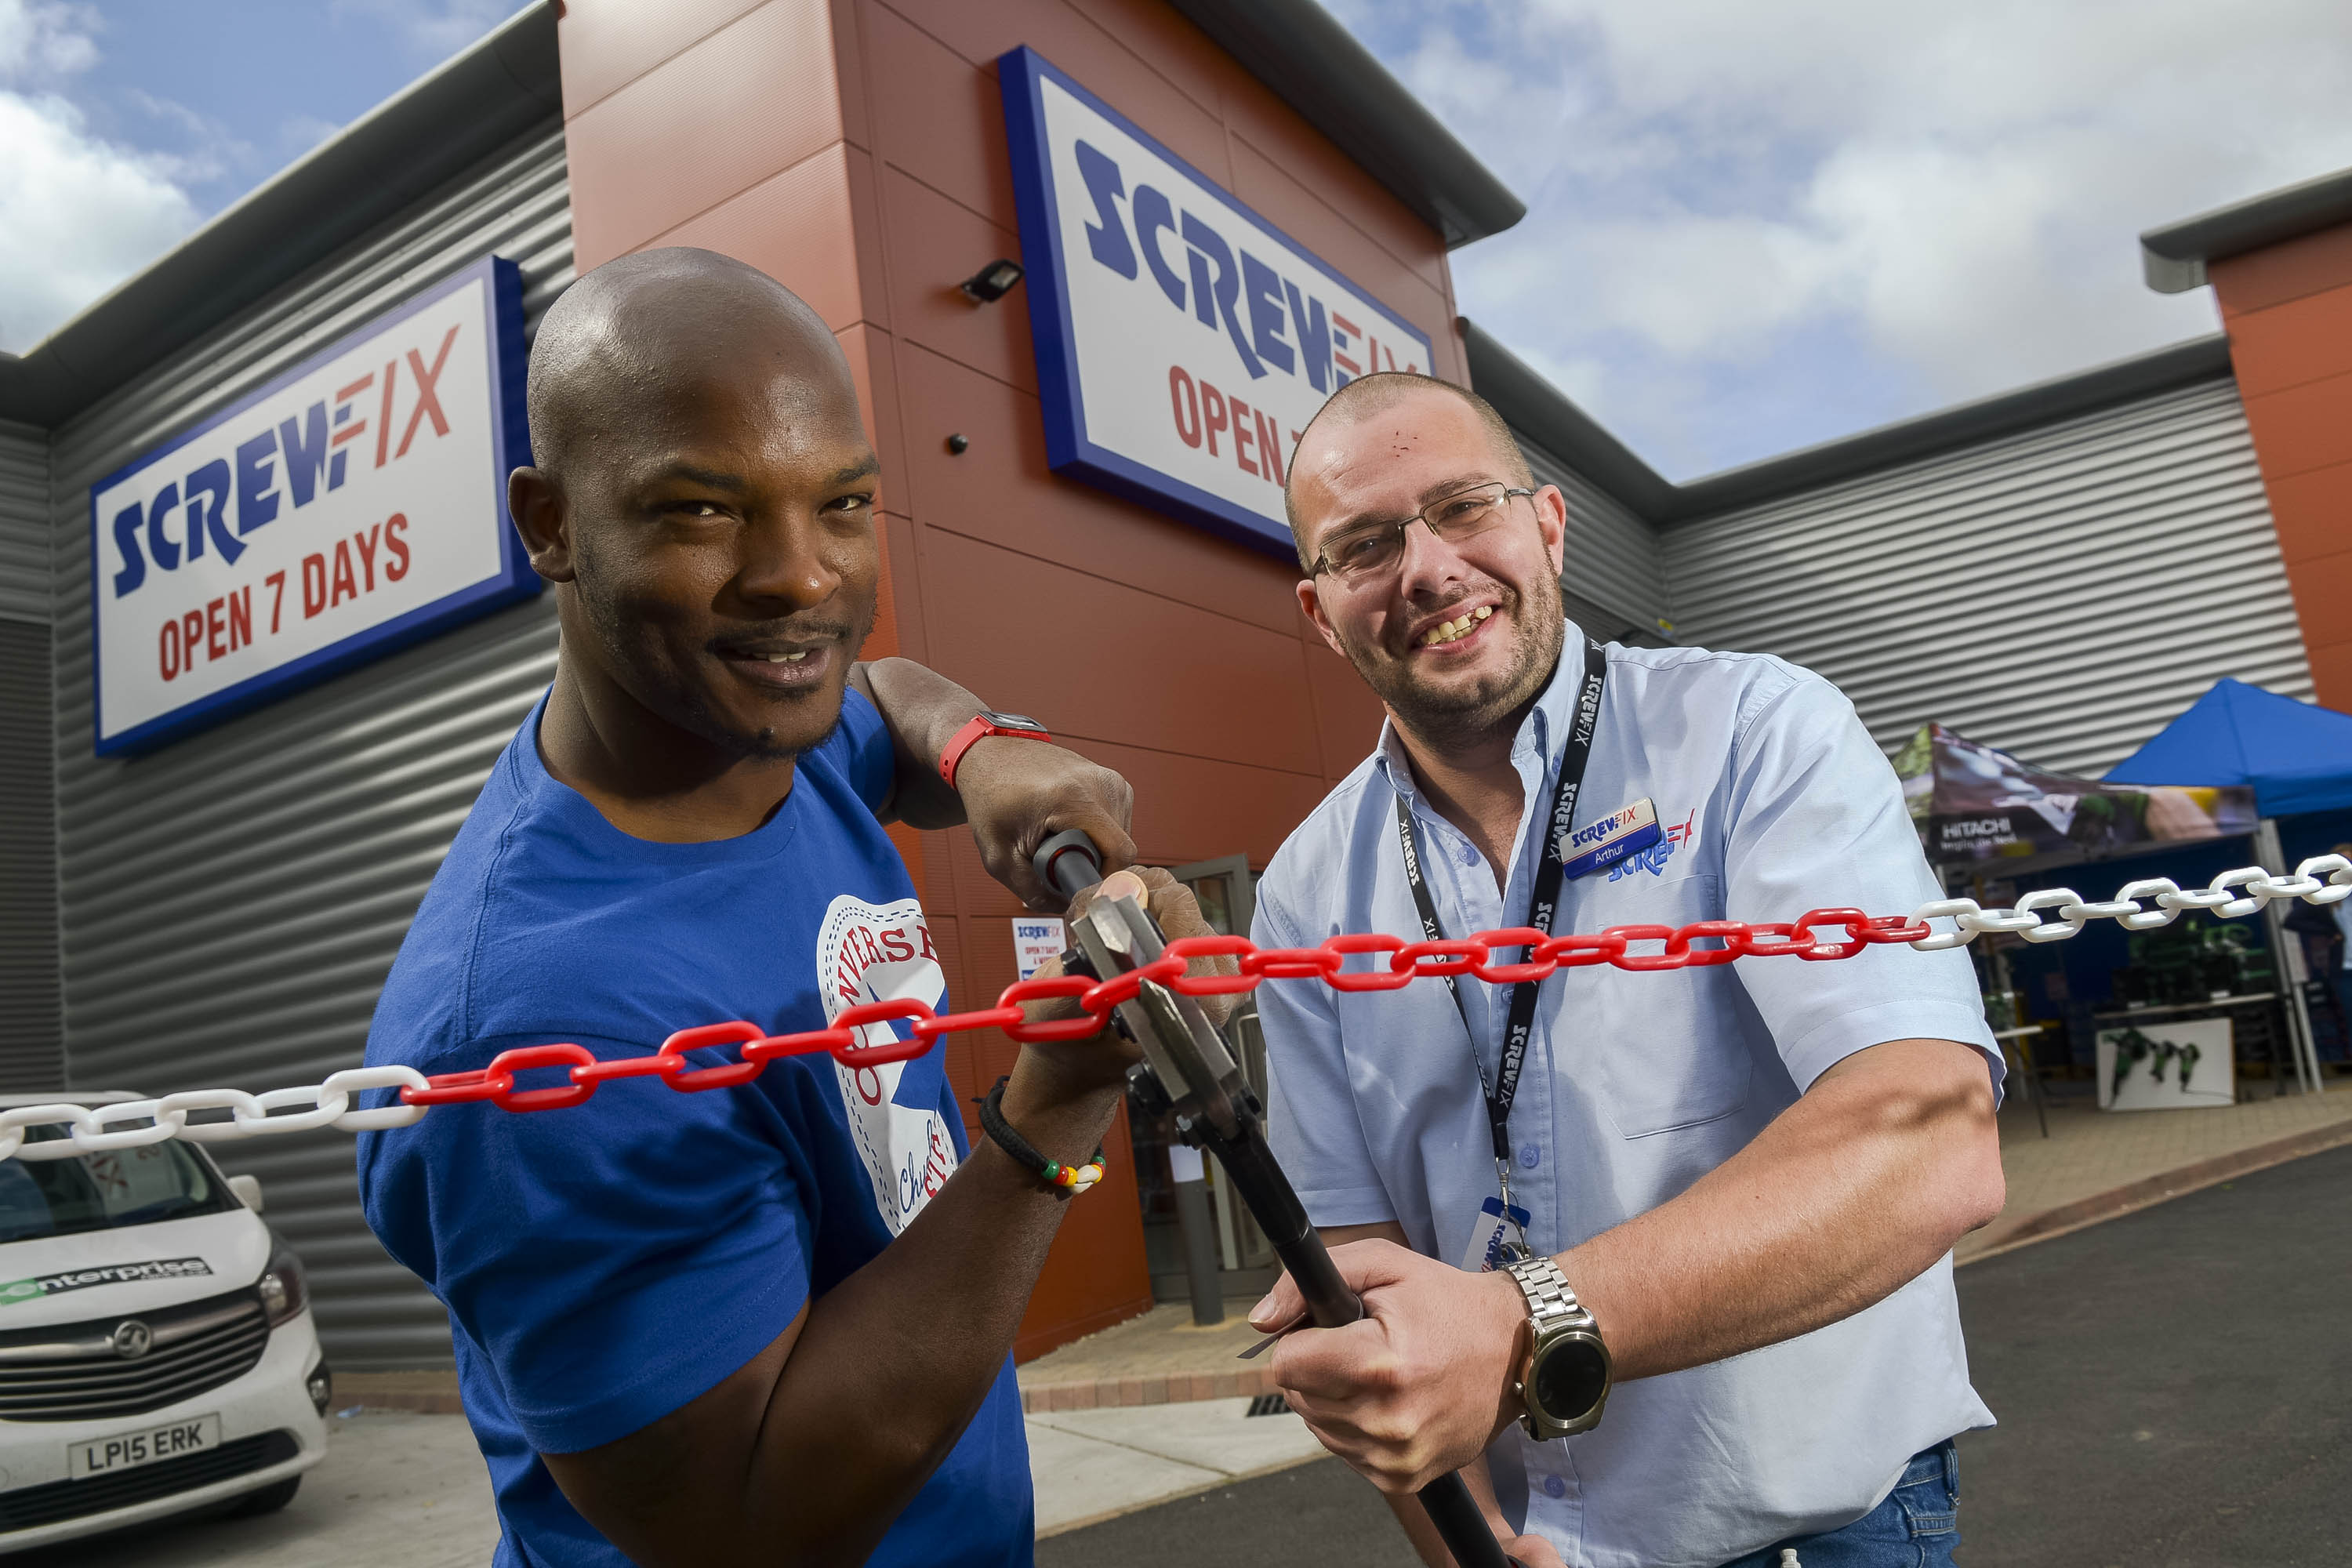 Surrey Canal’s first Screwfix store is declared a runaway success